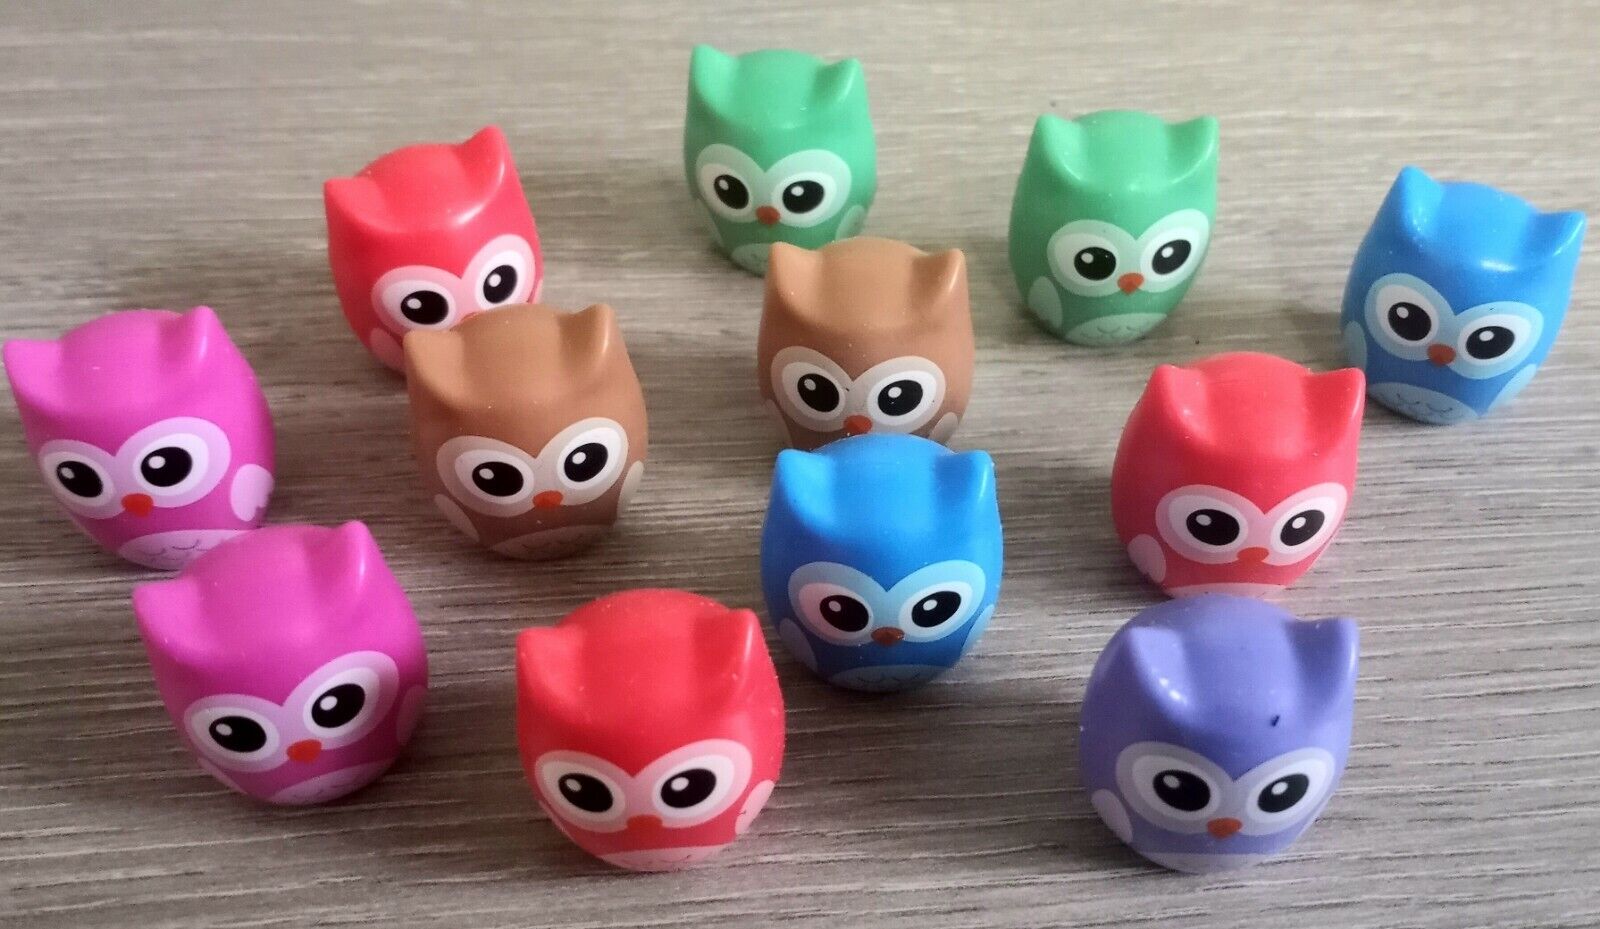 Lot of 12 Rubber Owl Animal Pencil Toppers Super Cute Color Variety  Collectible | eBay